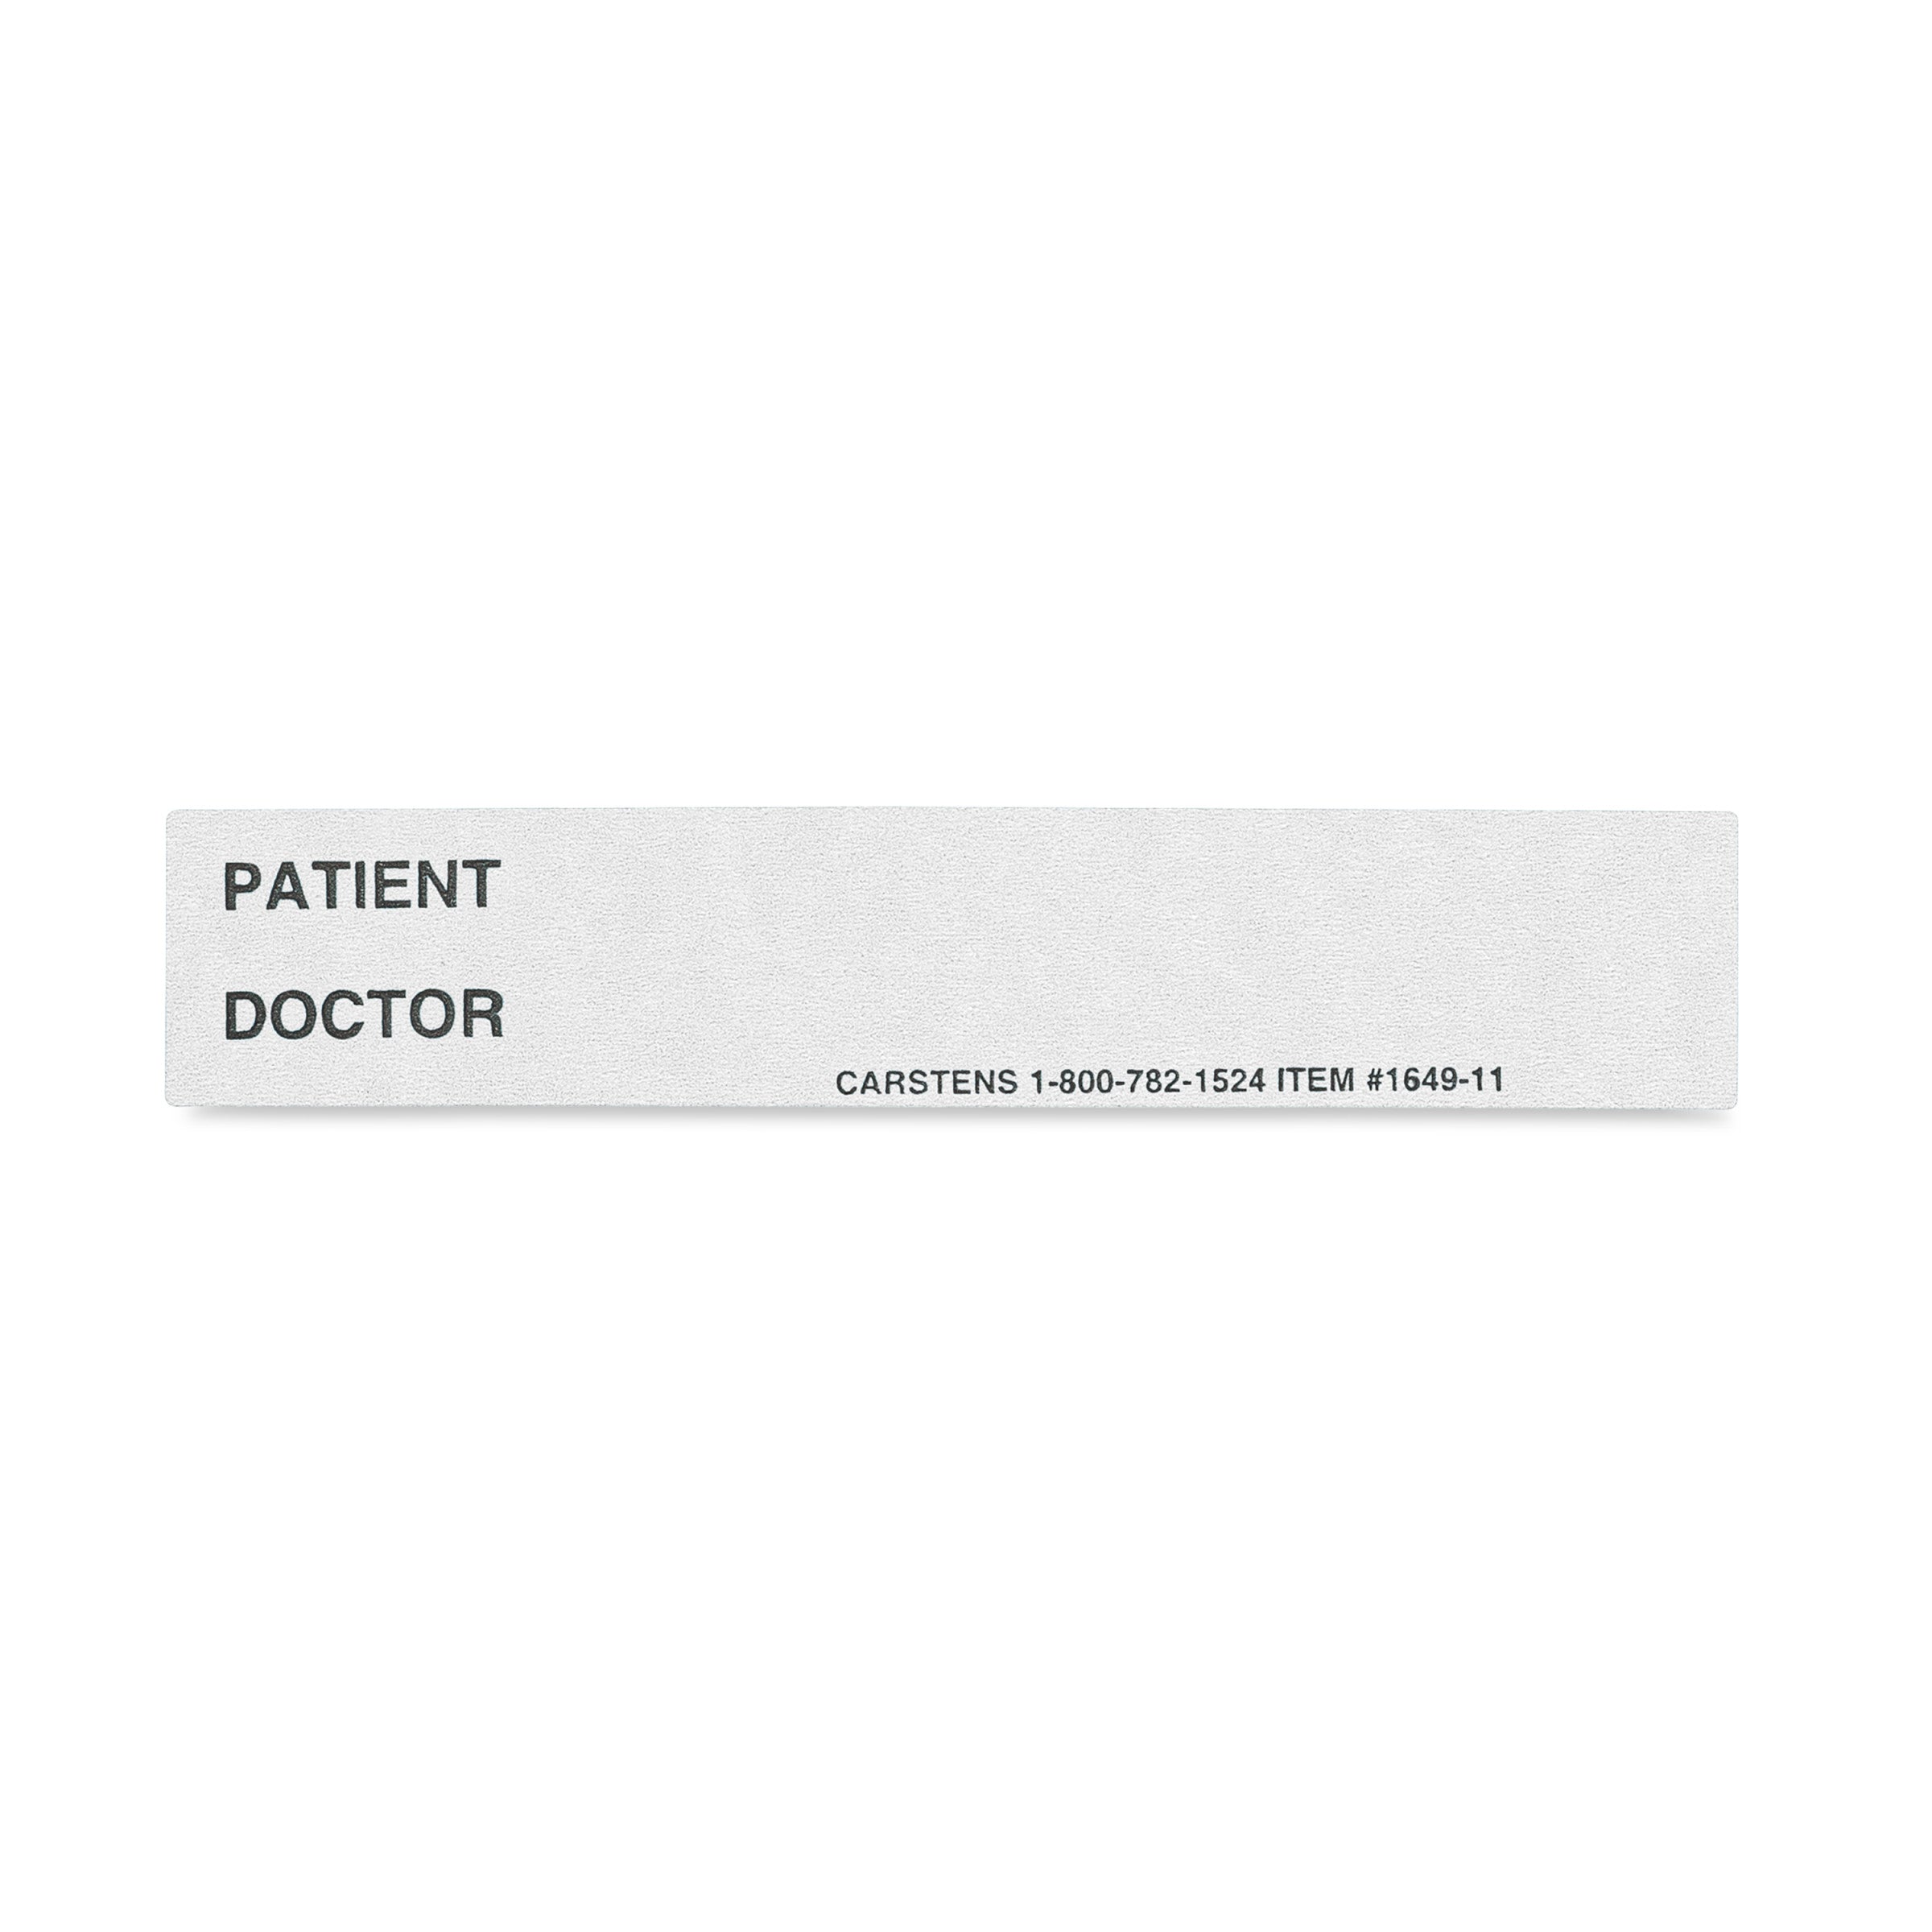 Patient / Doctor Preprinted ID Cards for 1.5 – 4” Ring Binder Spines - Pack of 100